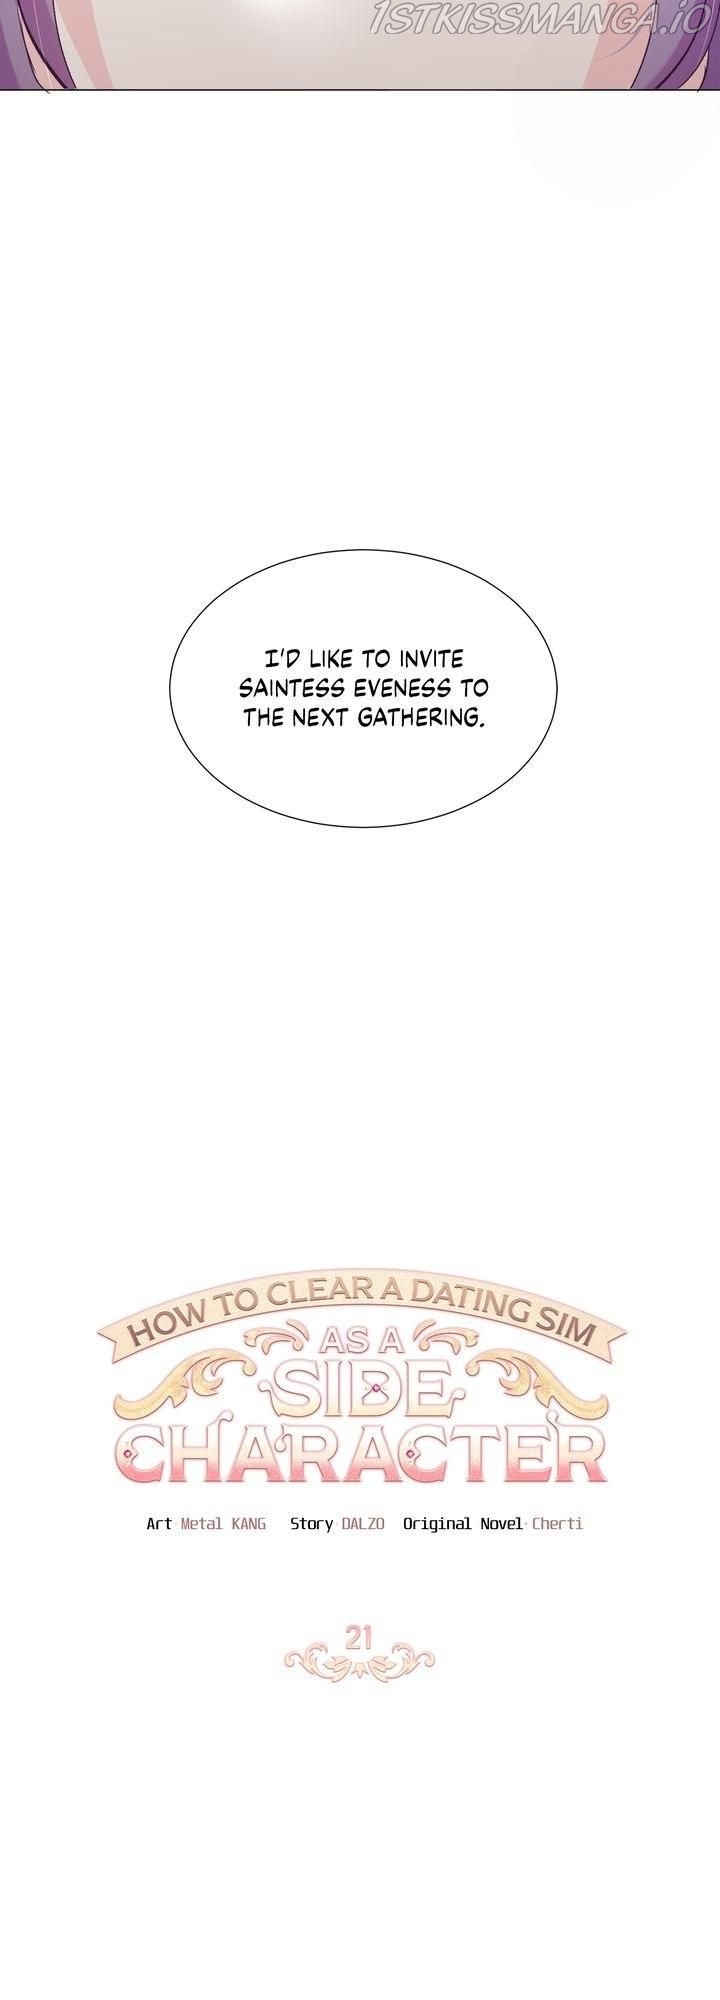 How To Clear A Dating Sim As A Side Character - Page 2